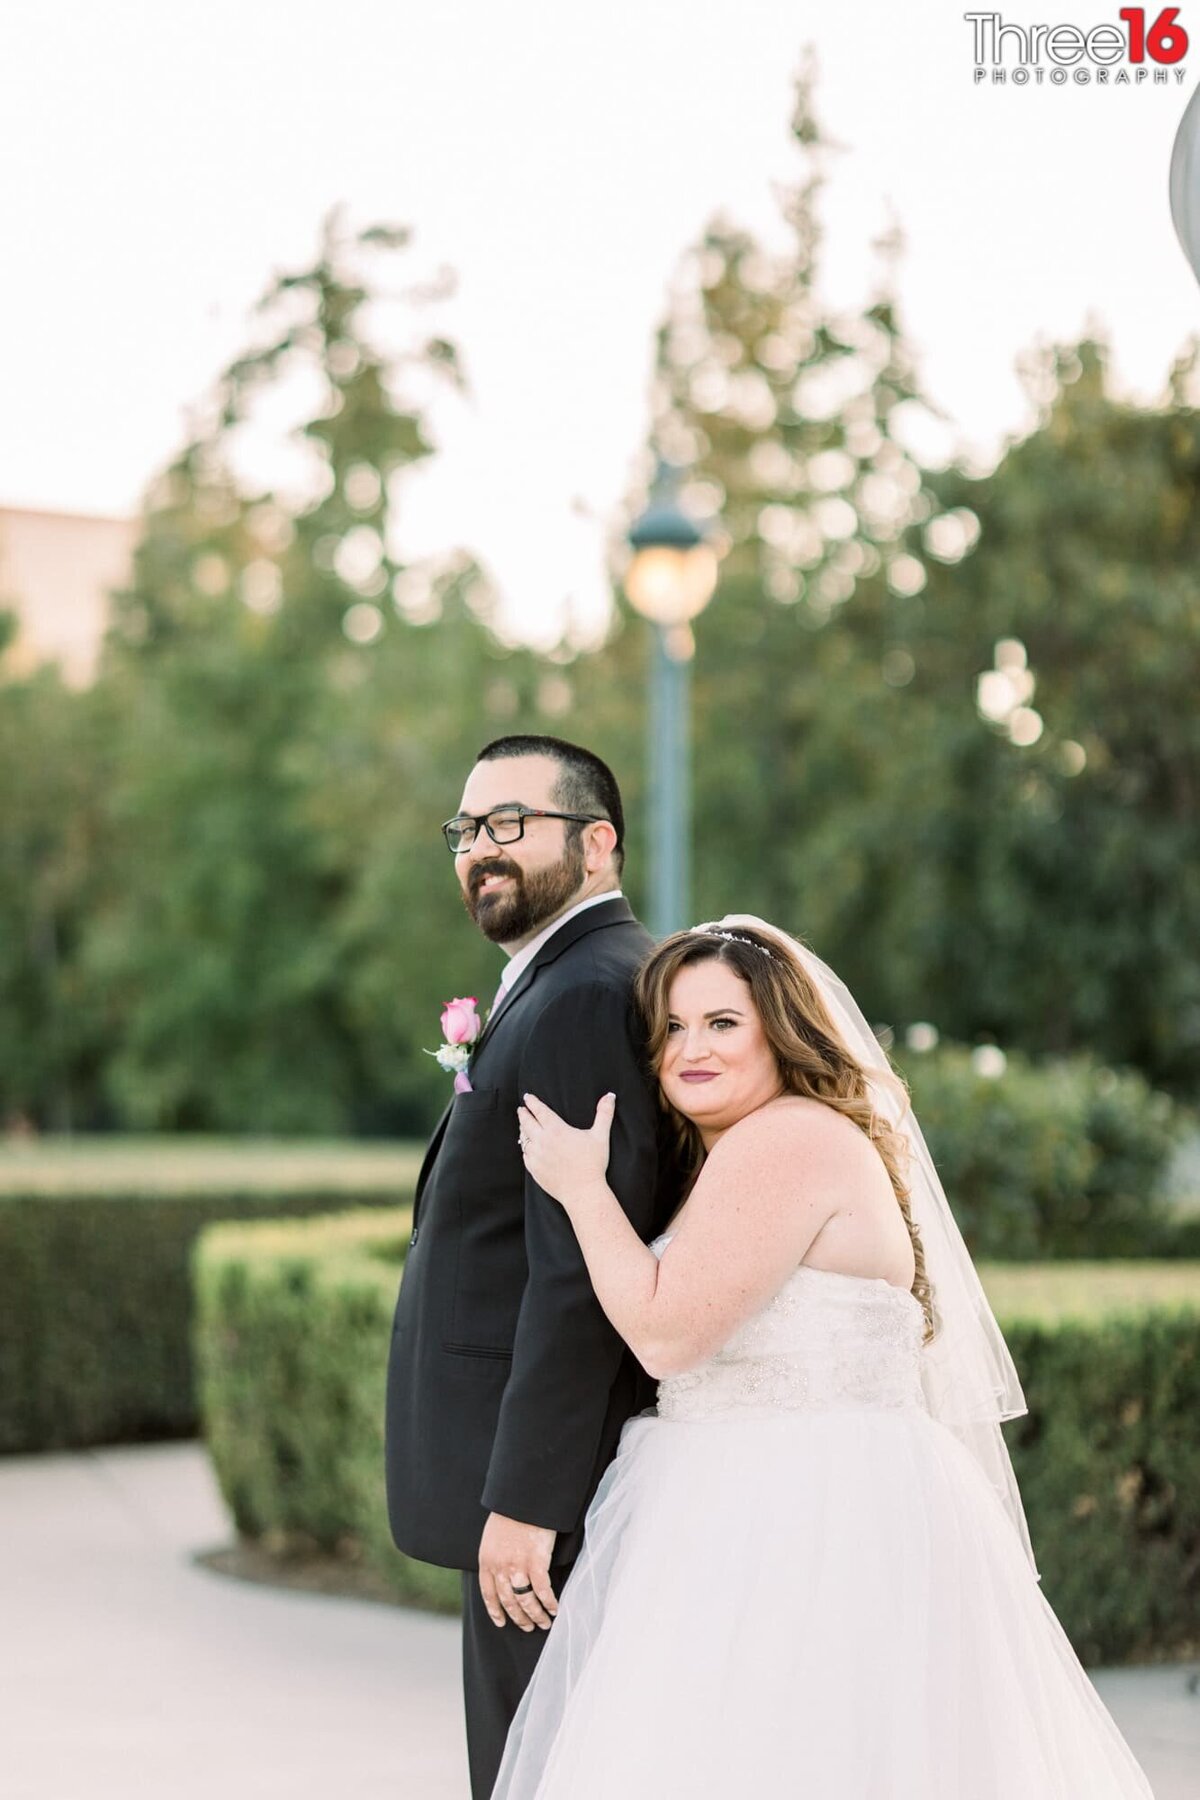 Bride embraces her Groom from behind during photo shoot